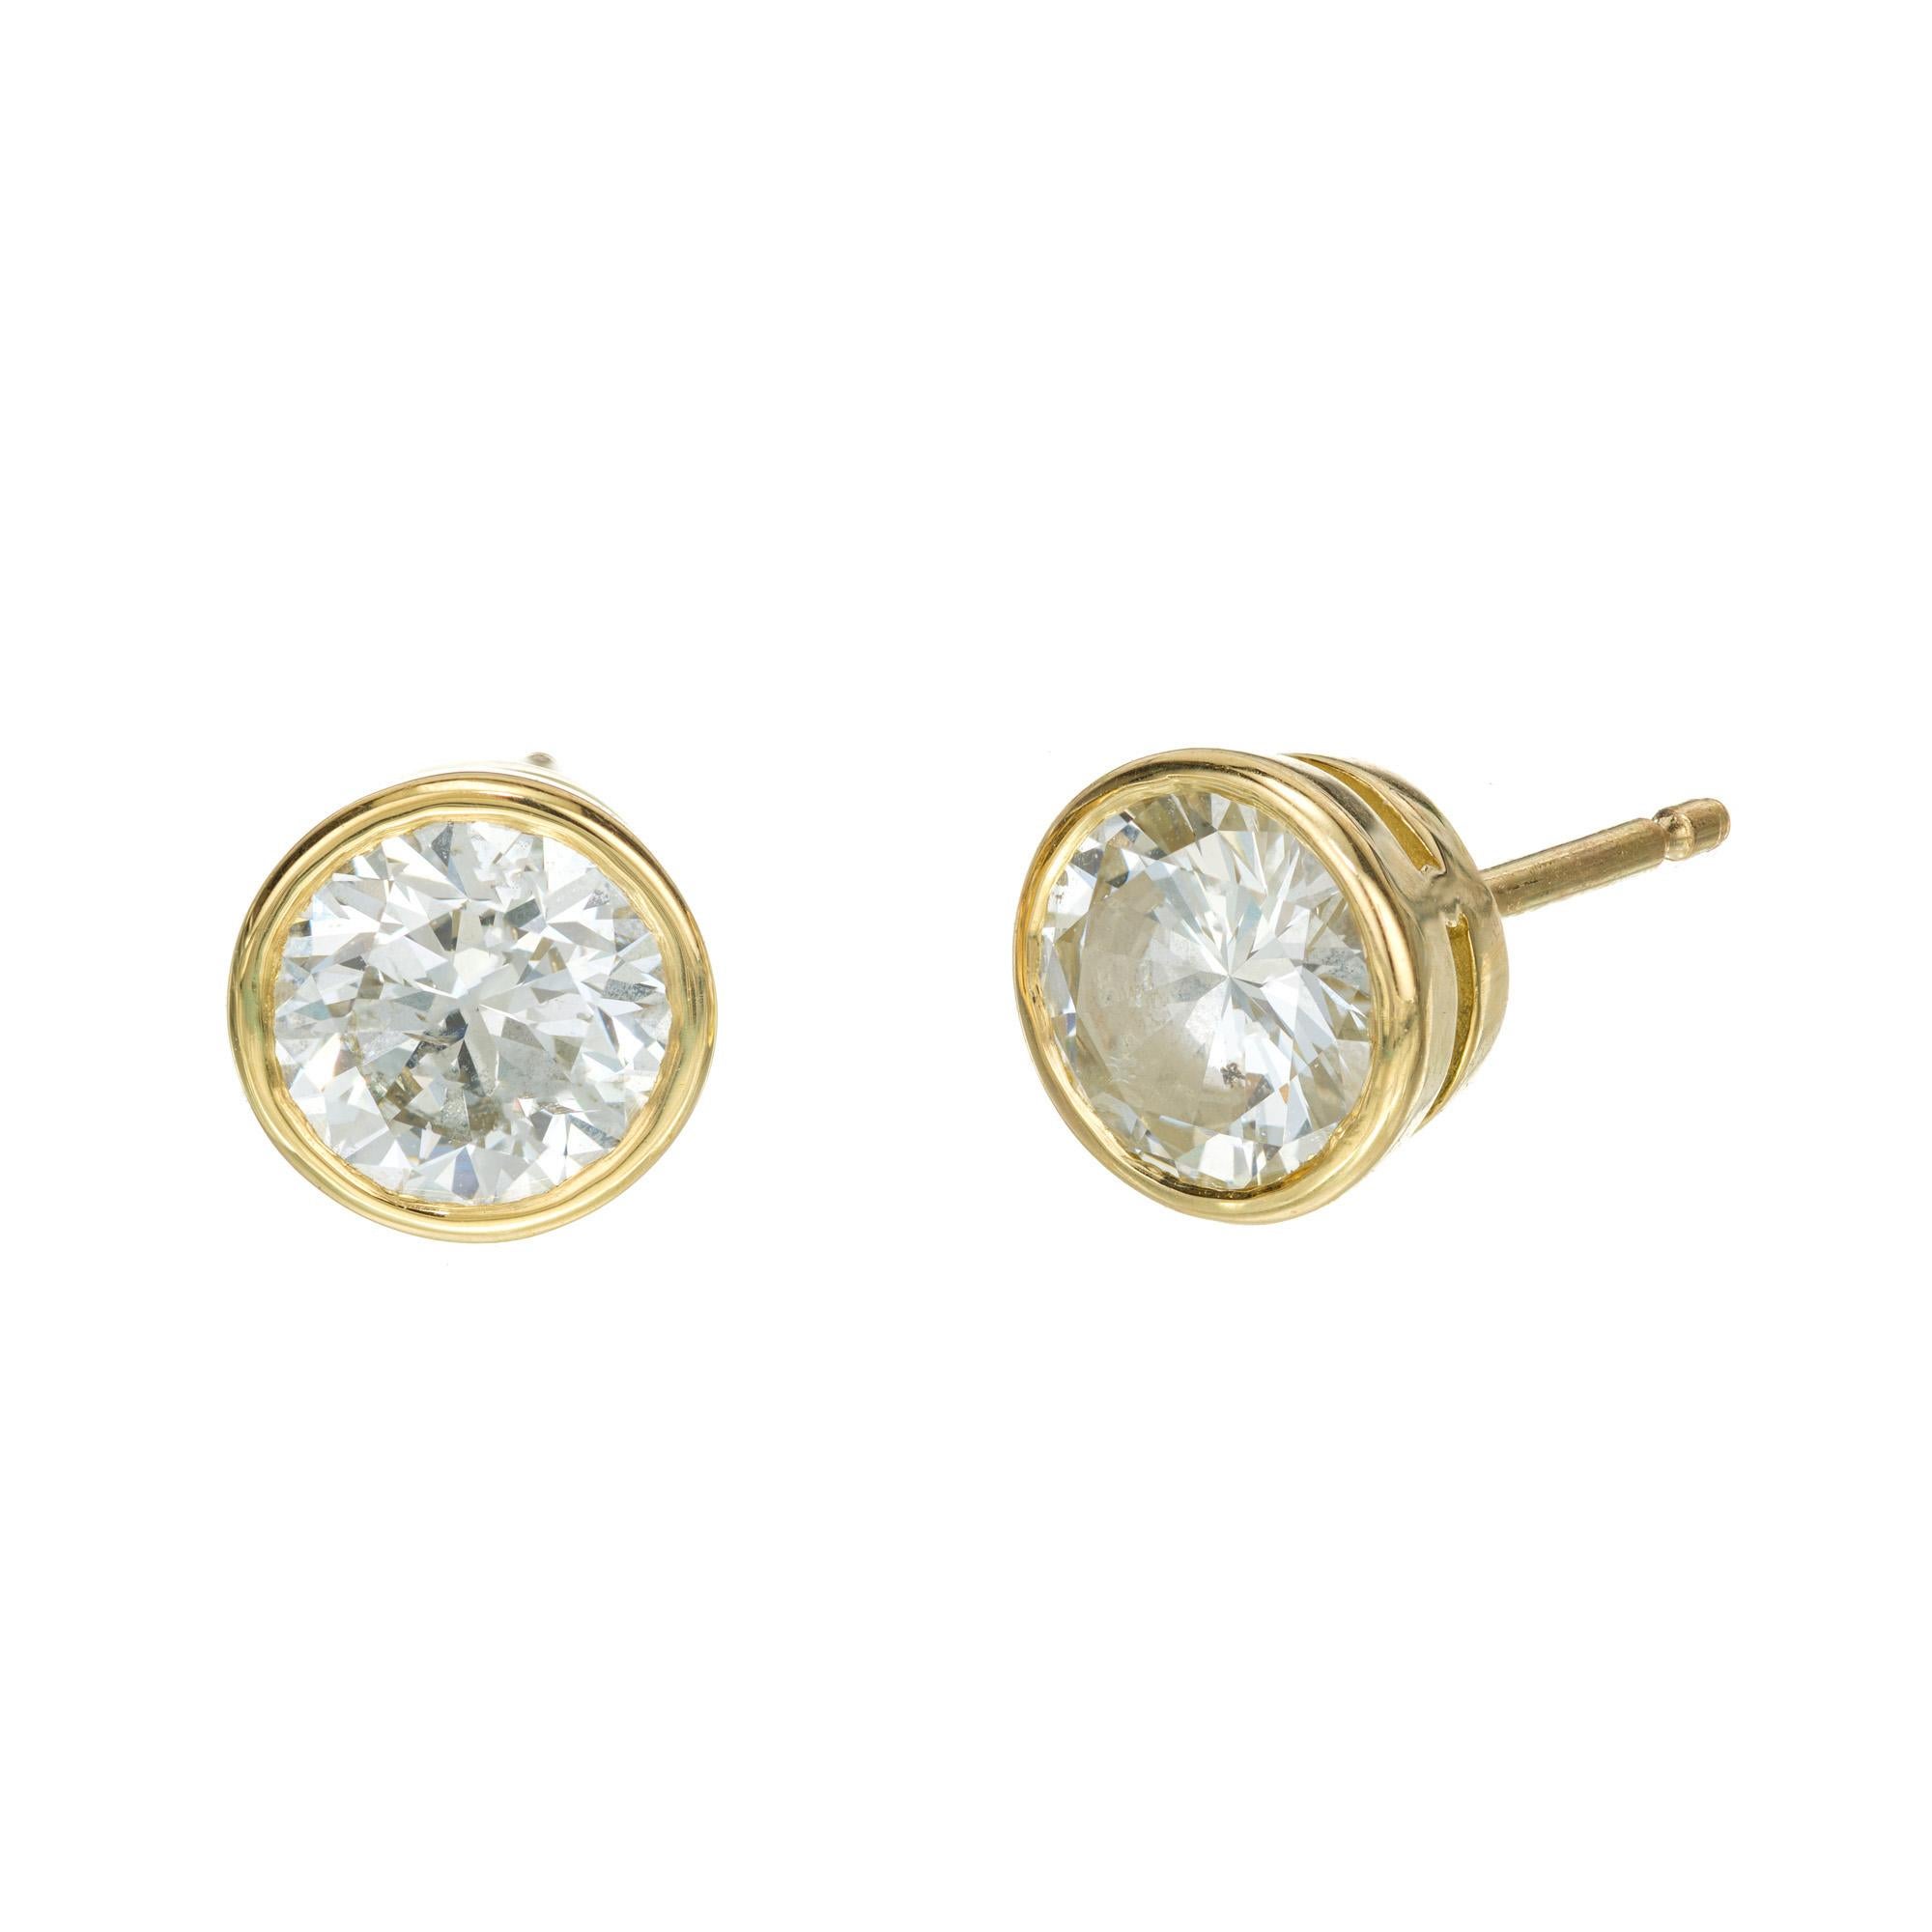 Well matched pair of transitional cut diamond stud earrings. 2 GIA certified 1.50ct bezel set round brilliant cut diamonds. The diamonds are from the 1940's set in 18k yellow gold bezel settings. Designed and crafted in the Peter Suchy workshop. 

1